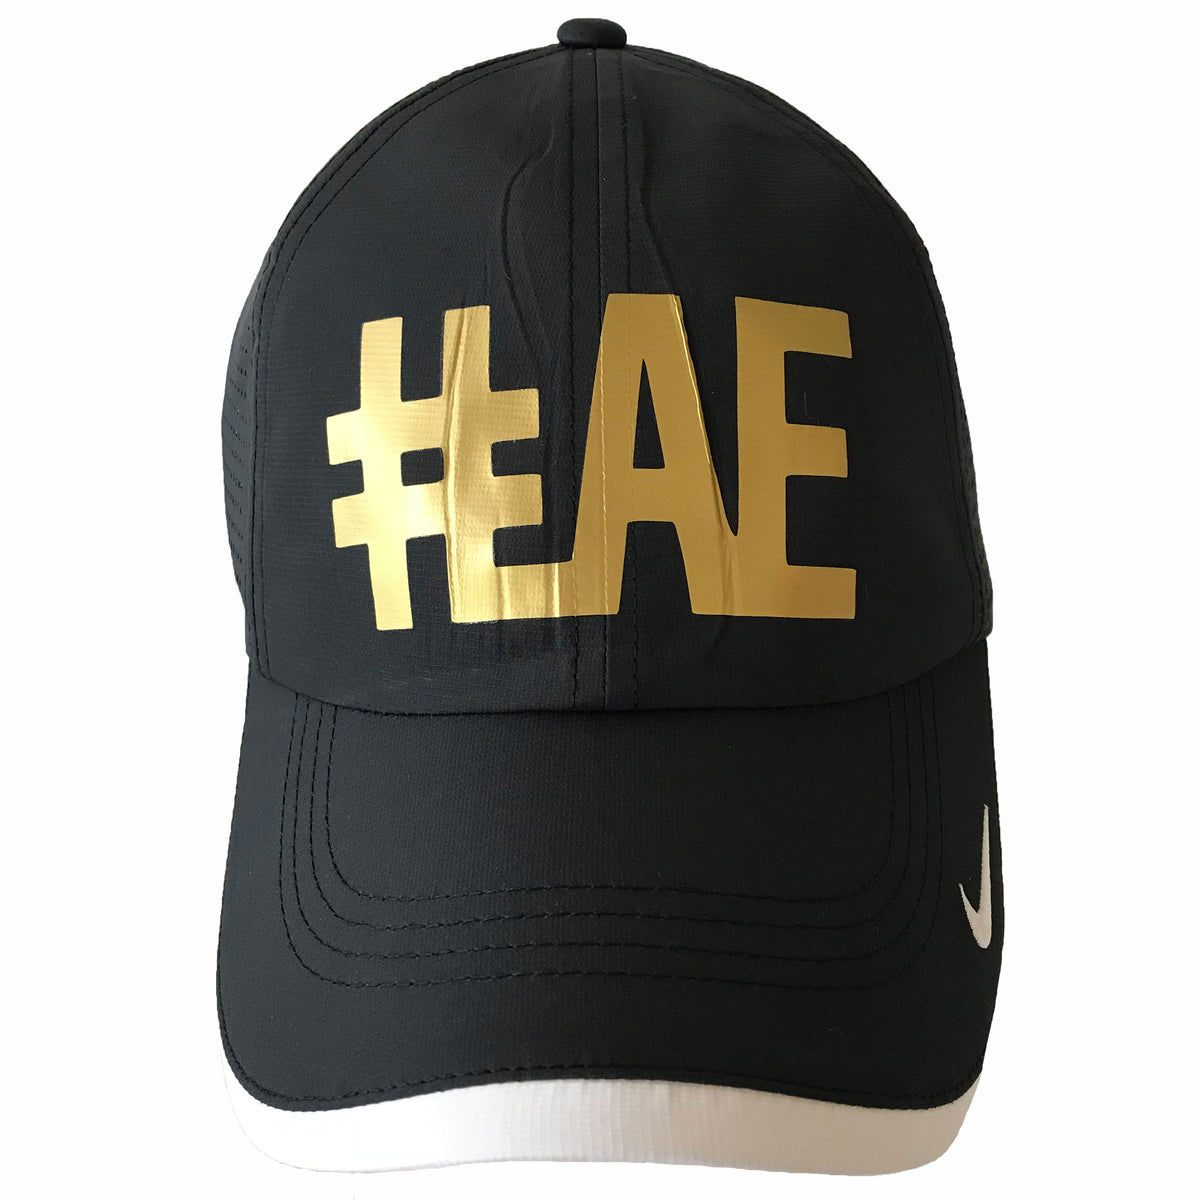 #LAE Nike Eventing cap with golden logo